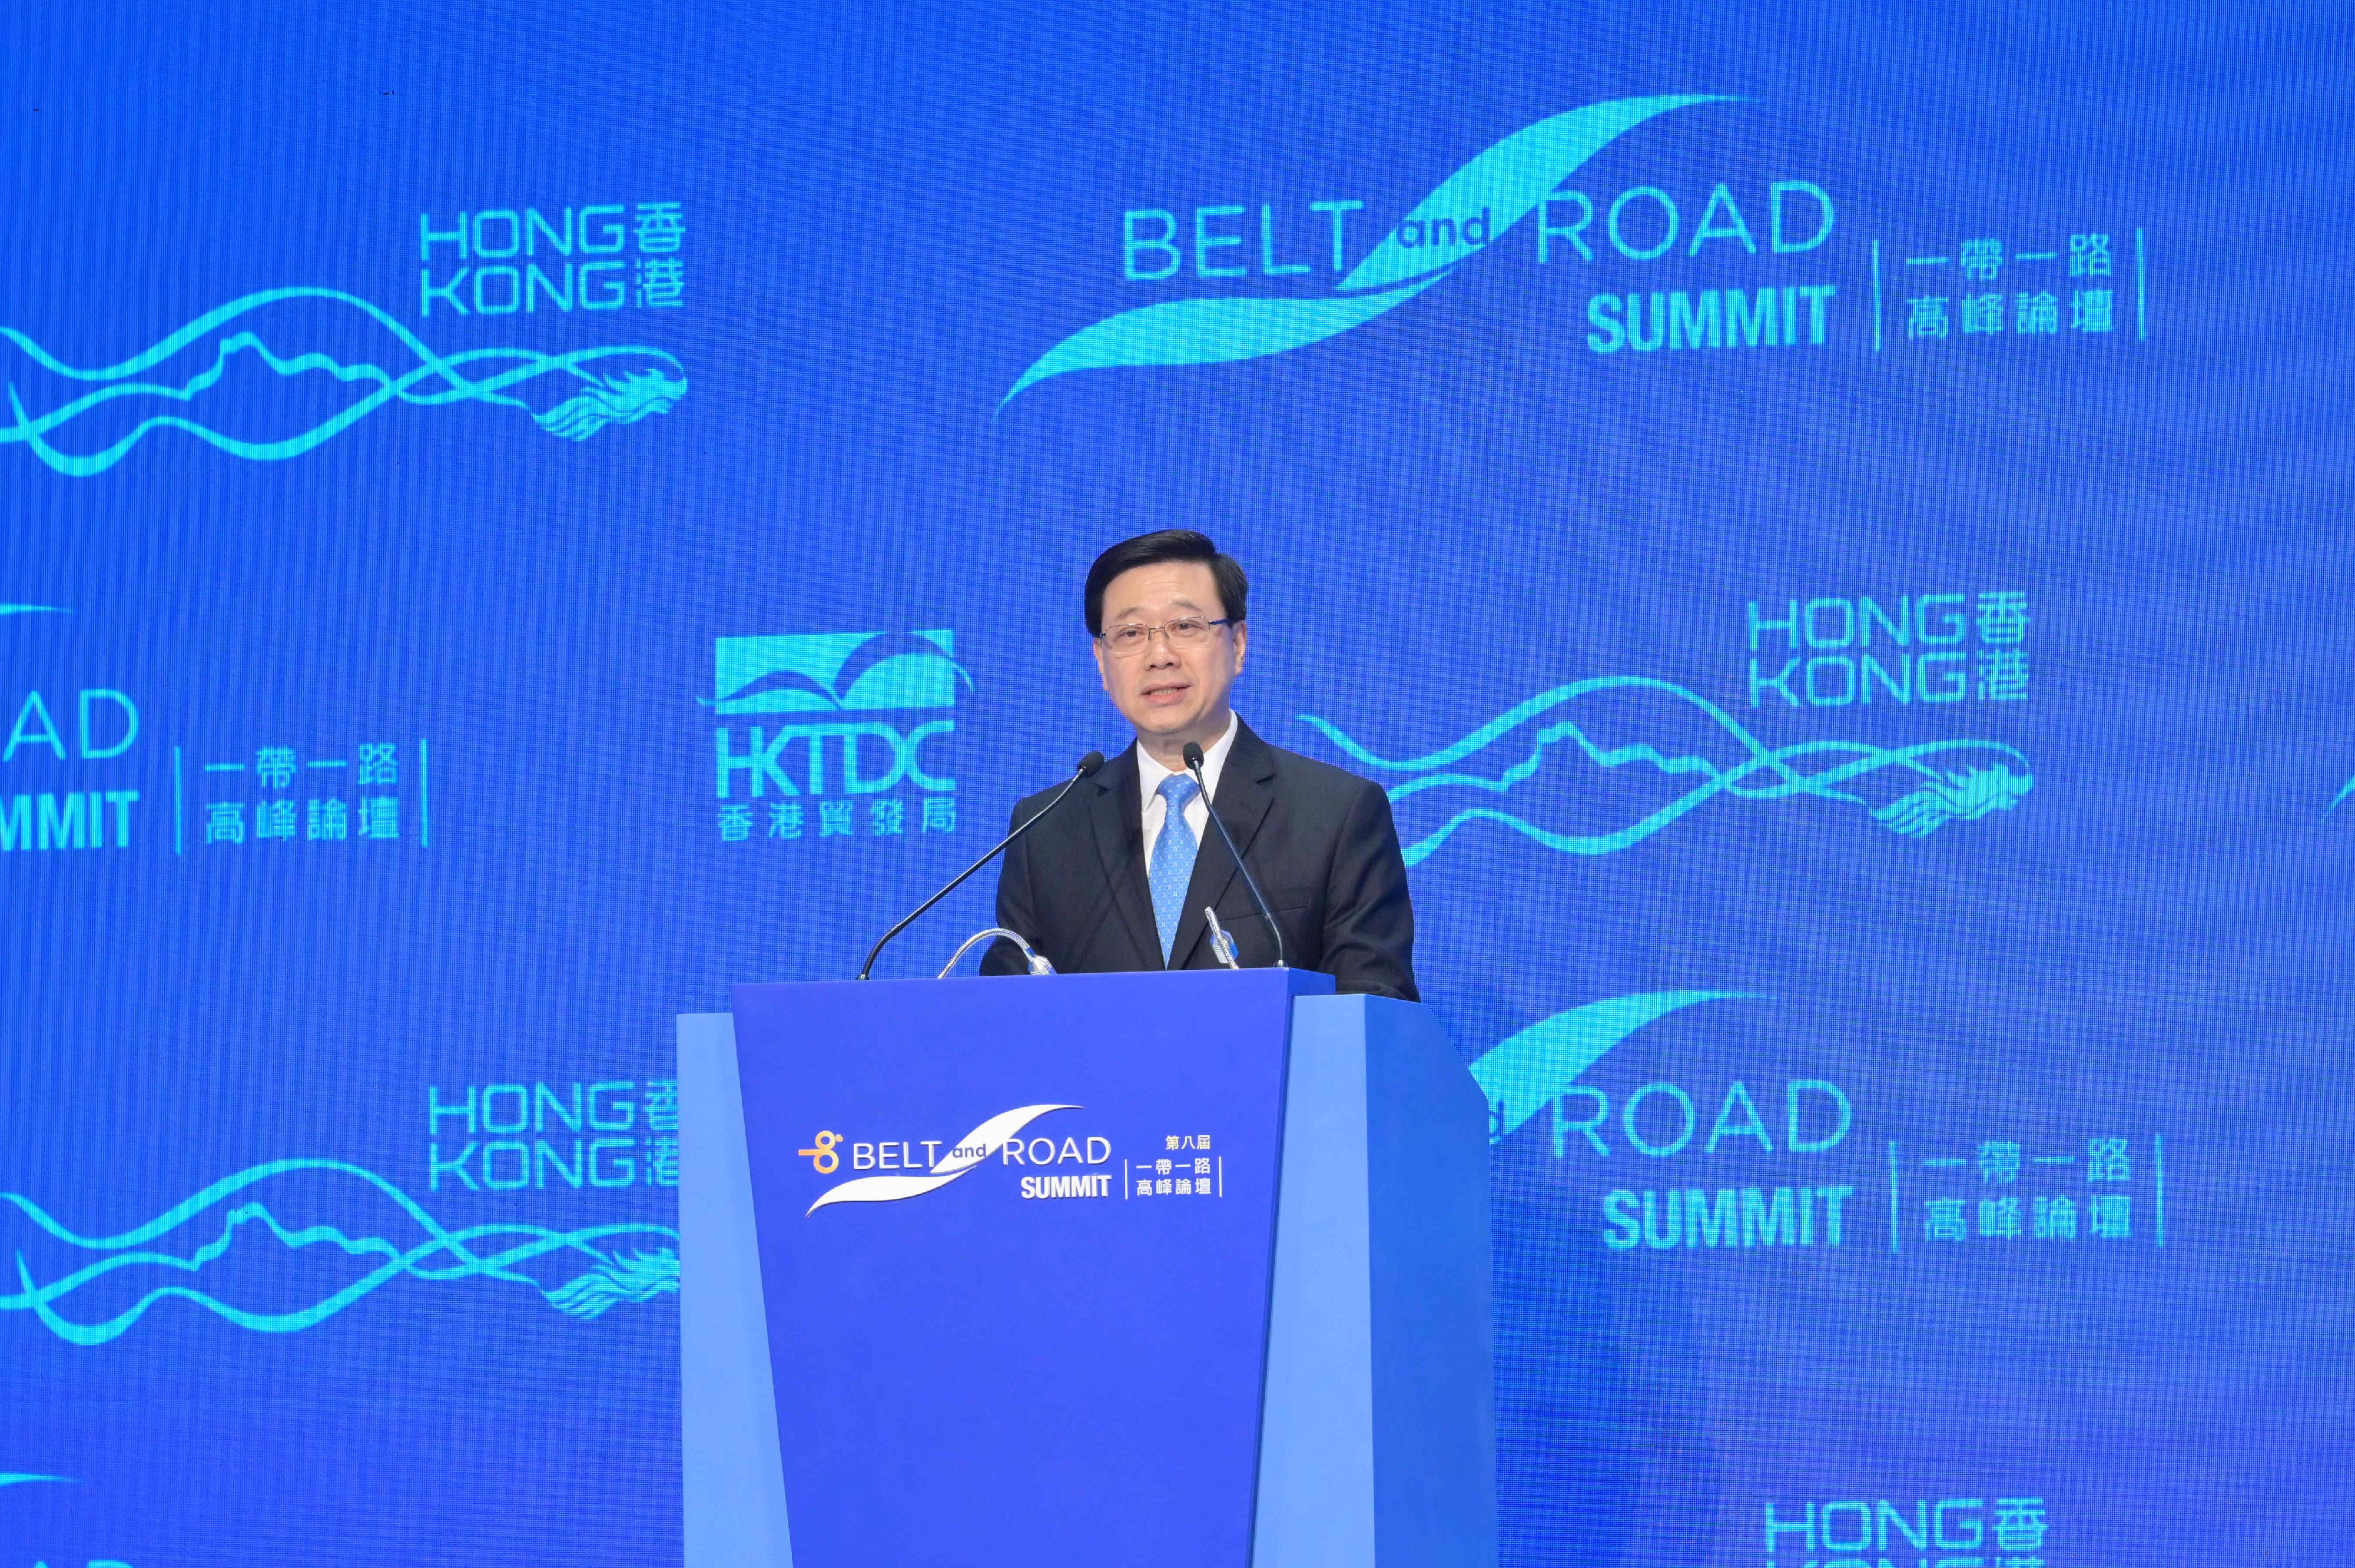 The Chief Executive, Mr John Lee, speaks at the opening session of the eighth Belt and Road Summit today (September 13).